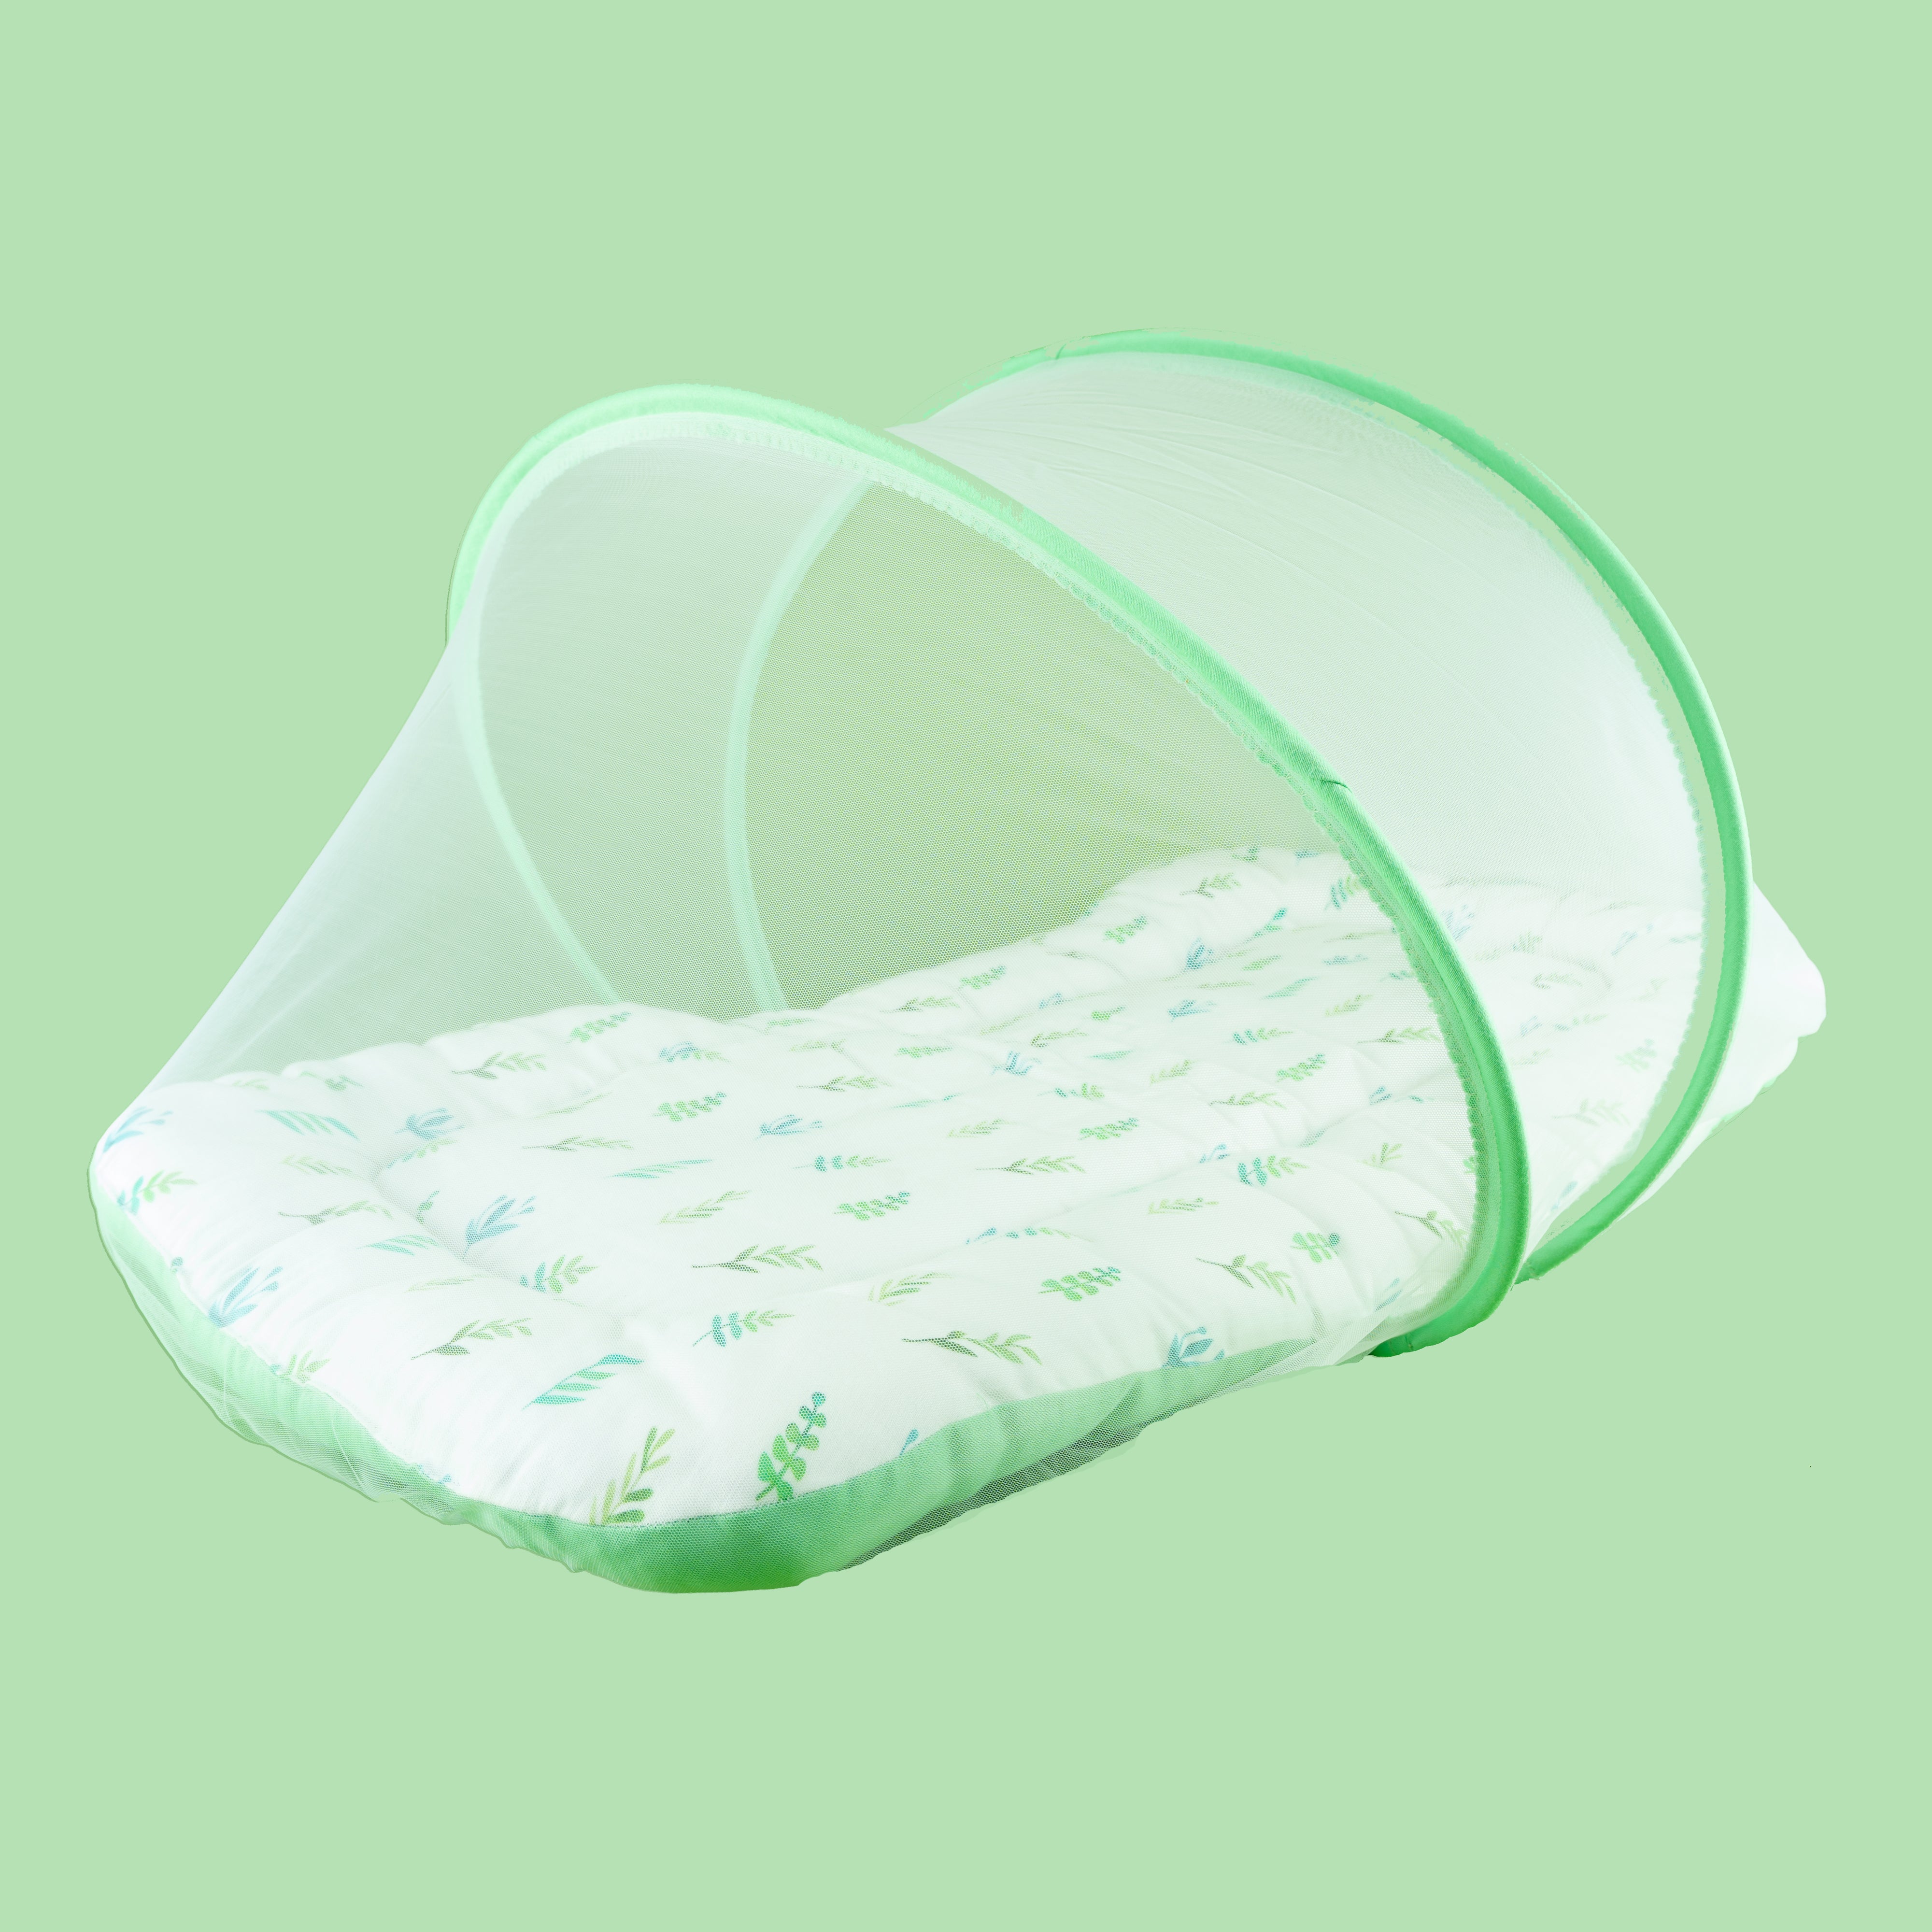 Tiny Snooze Organic Baby Mattress With Net- Leaves